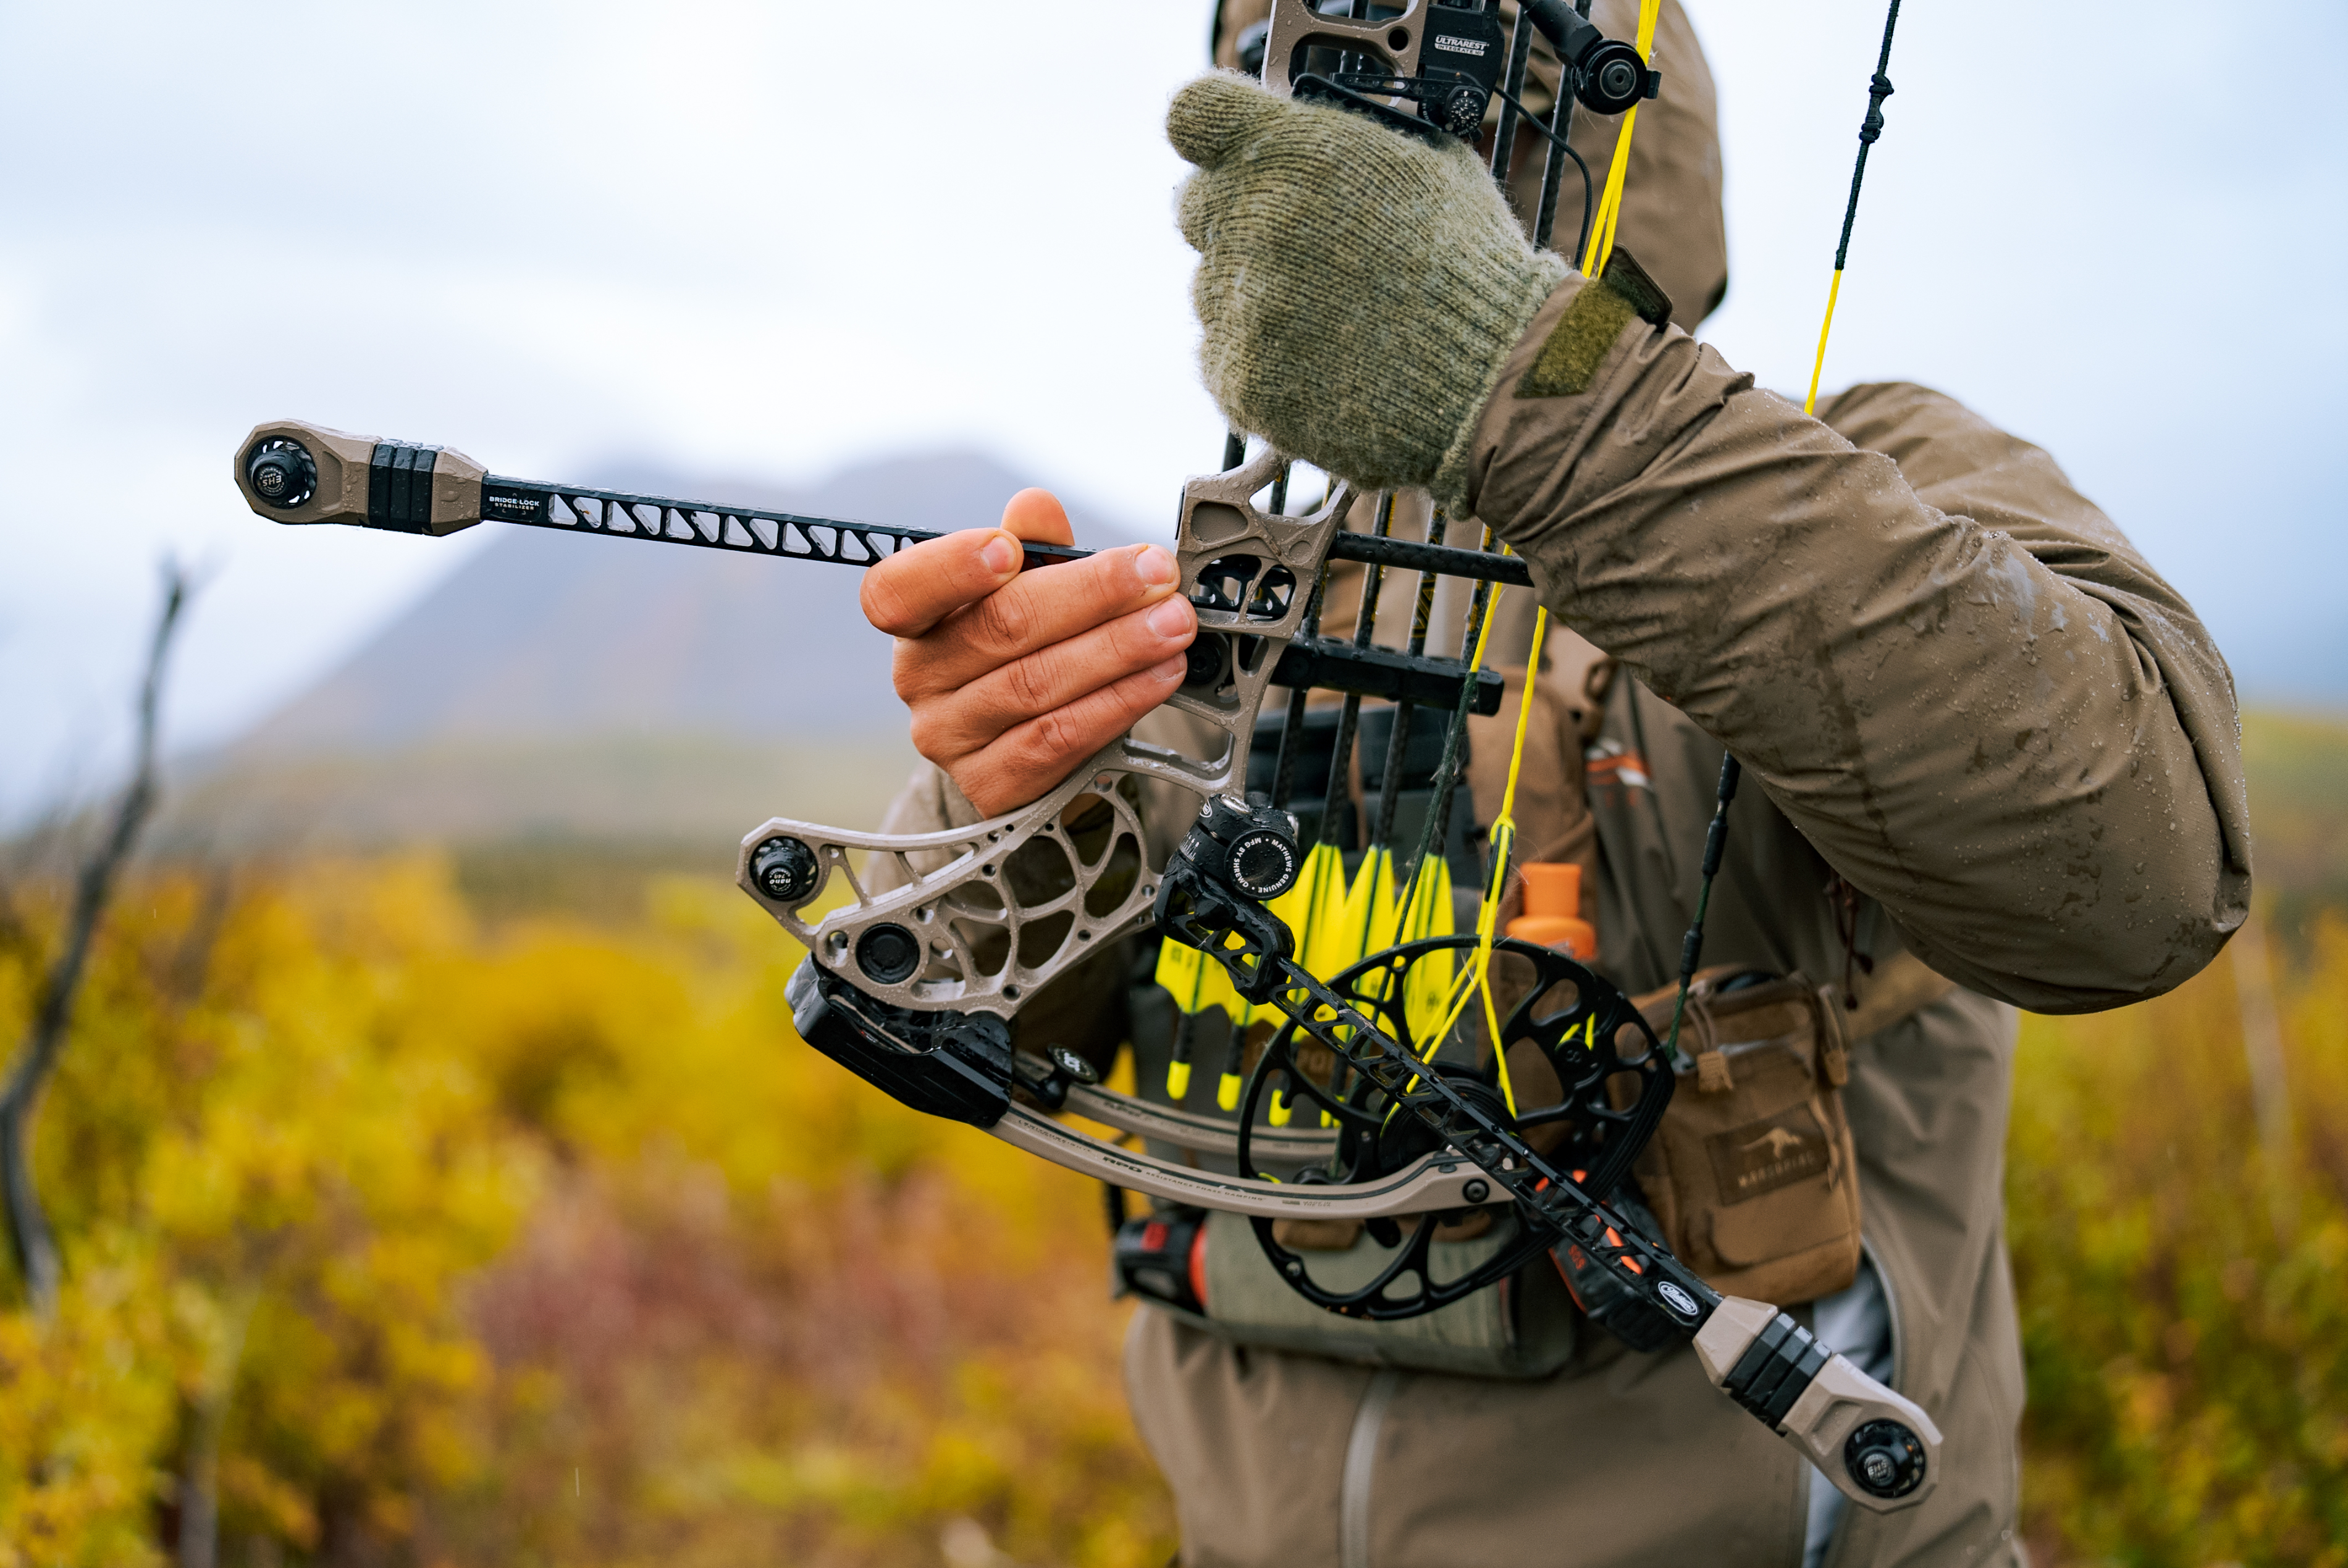 Dead Quiet: Mathews Phase4 Bow’s New Limbs, Improved ‘Bridge-Lock’ System Add Stealth to Your Hunt